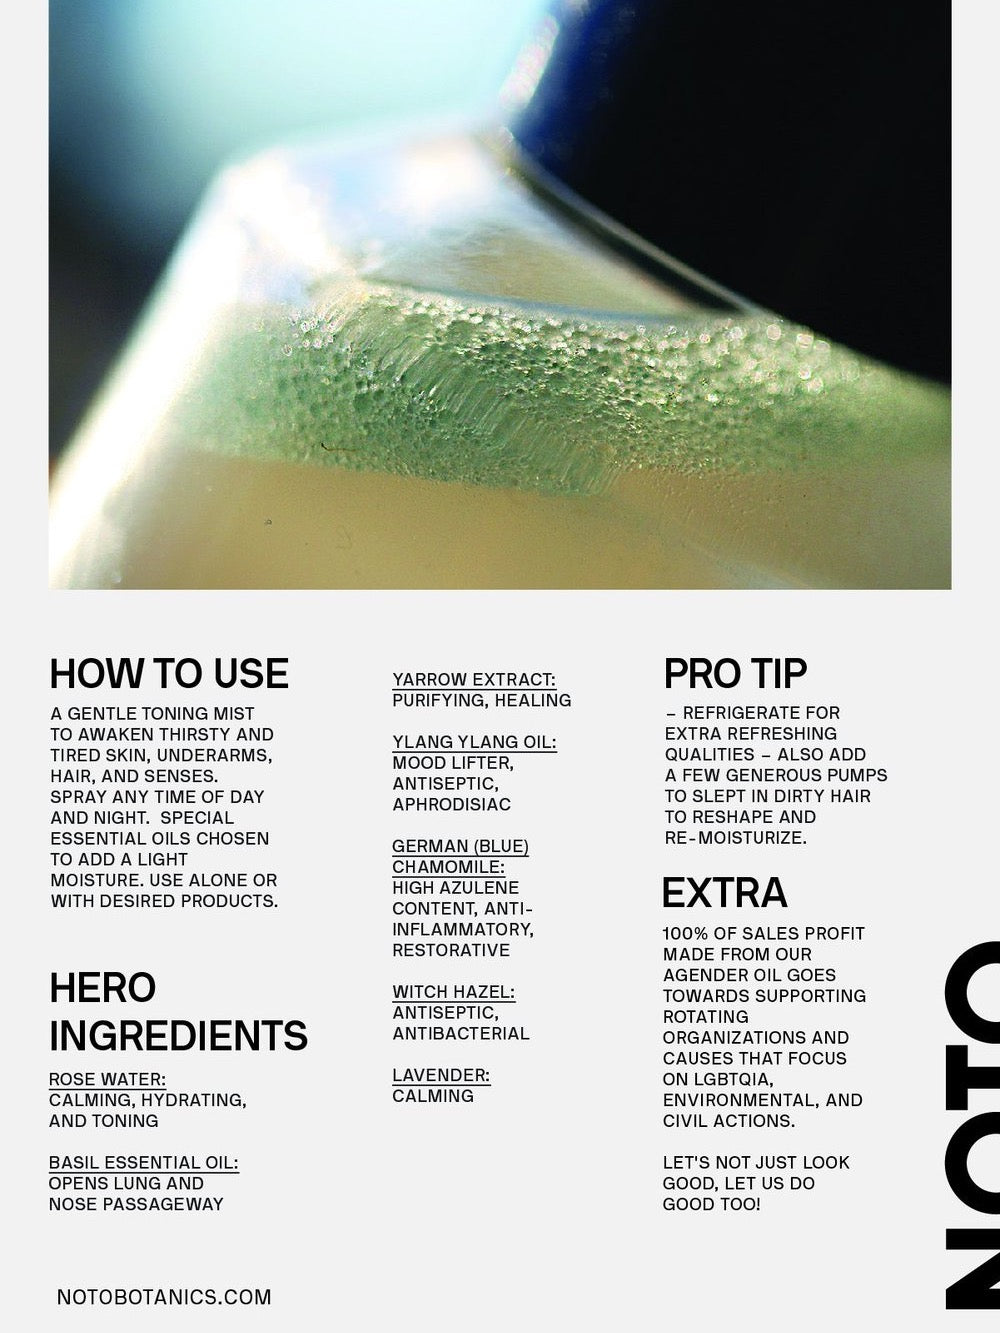 A poster showing the contents of a bottle of NOTO Basil Yarrow Mist.